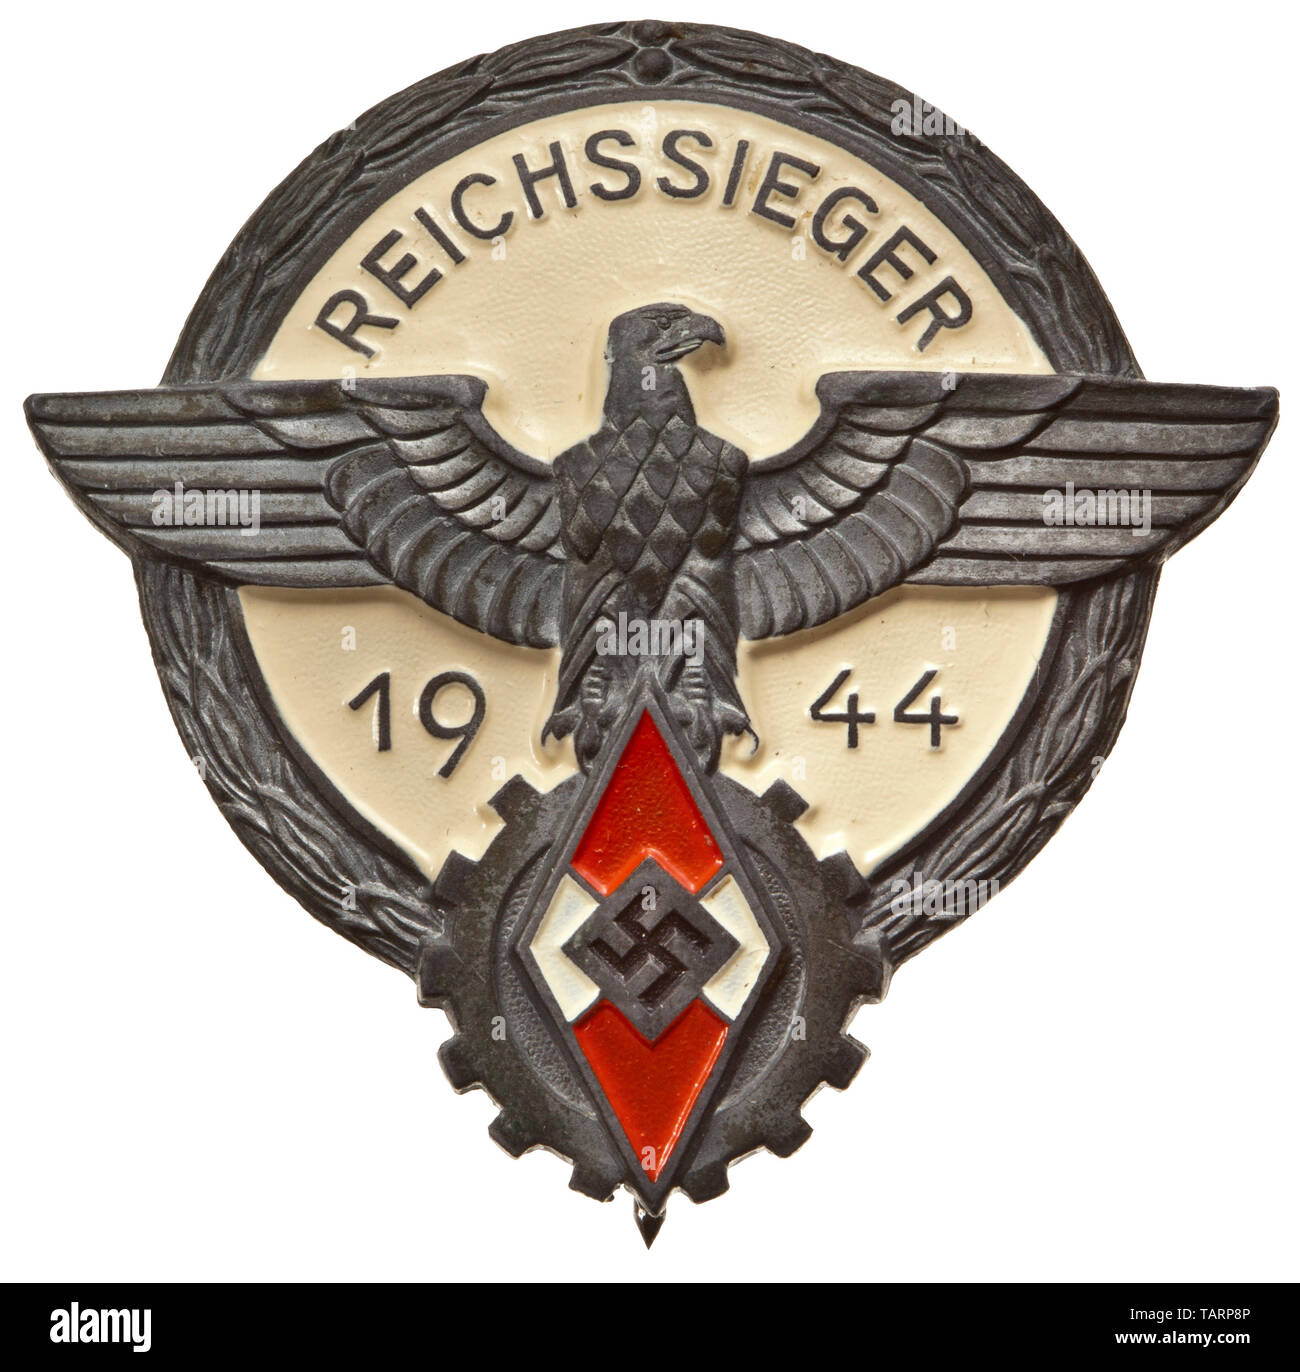 A victor's badge of the Reichsberufswettkampf - Reichssieger 1944, Embossed zinc badge made in one piece, with ball-head hinge and migrated gold plating, manufactured by the company 'G. BREHMER MARKNEUKIRCHEN'. The badges of 1944 were coloured with lacquer on the obverse. The vocational competition of 1944 with only 406 winners was the last wartime competition organised by the Reichsjugendführung and the German Labour Front. Width 49.5 mm. Weight 22.7 g. 20th century, 1930s, 1940s, awards, award, German Reich, Third Reich, Nazi era, National Socialism, object, objects, stil, Editorial-Use-Only Stock Photo